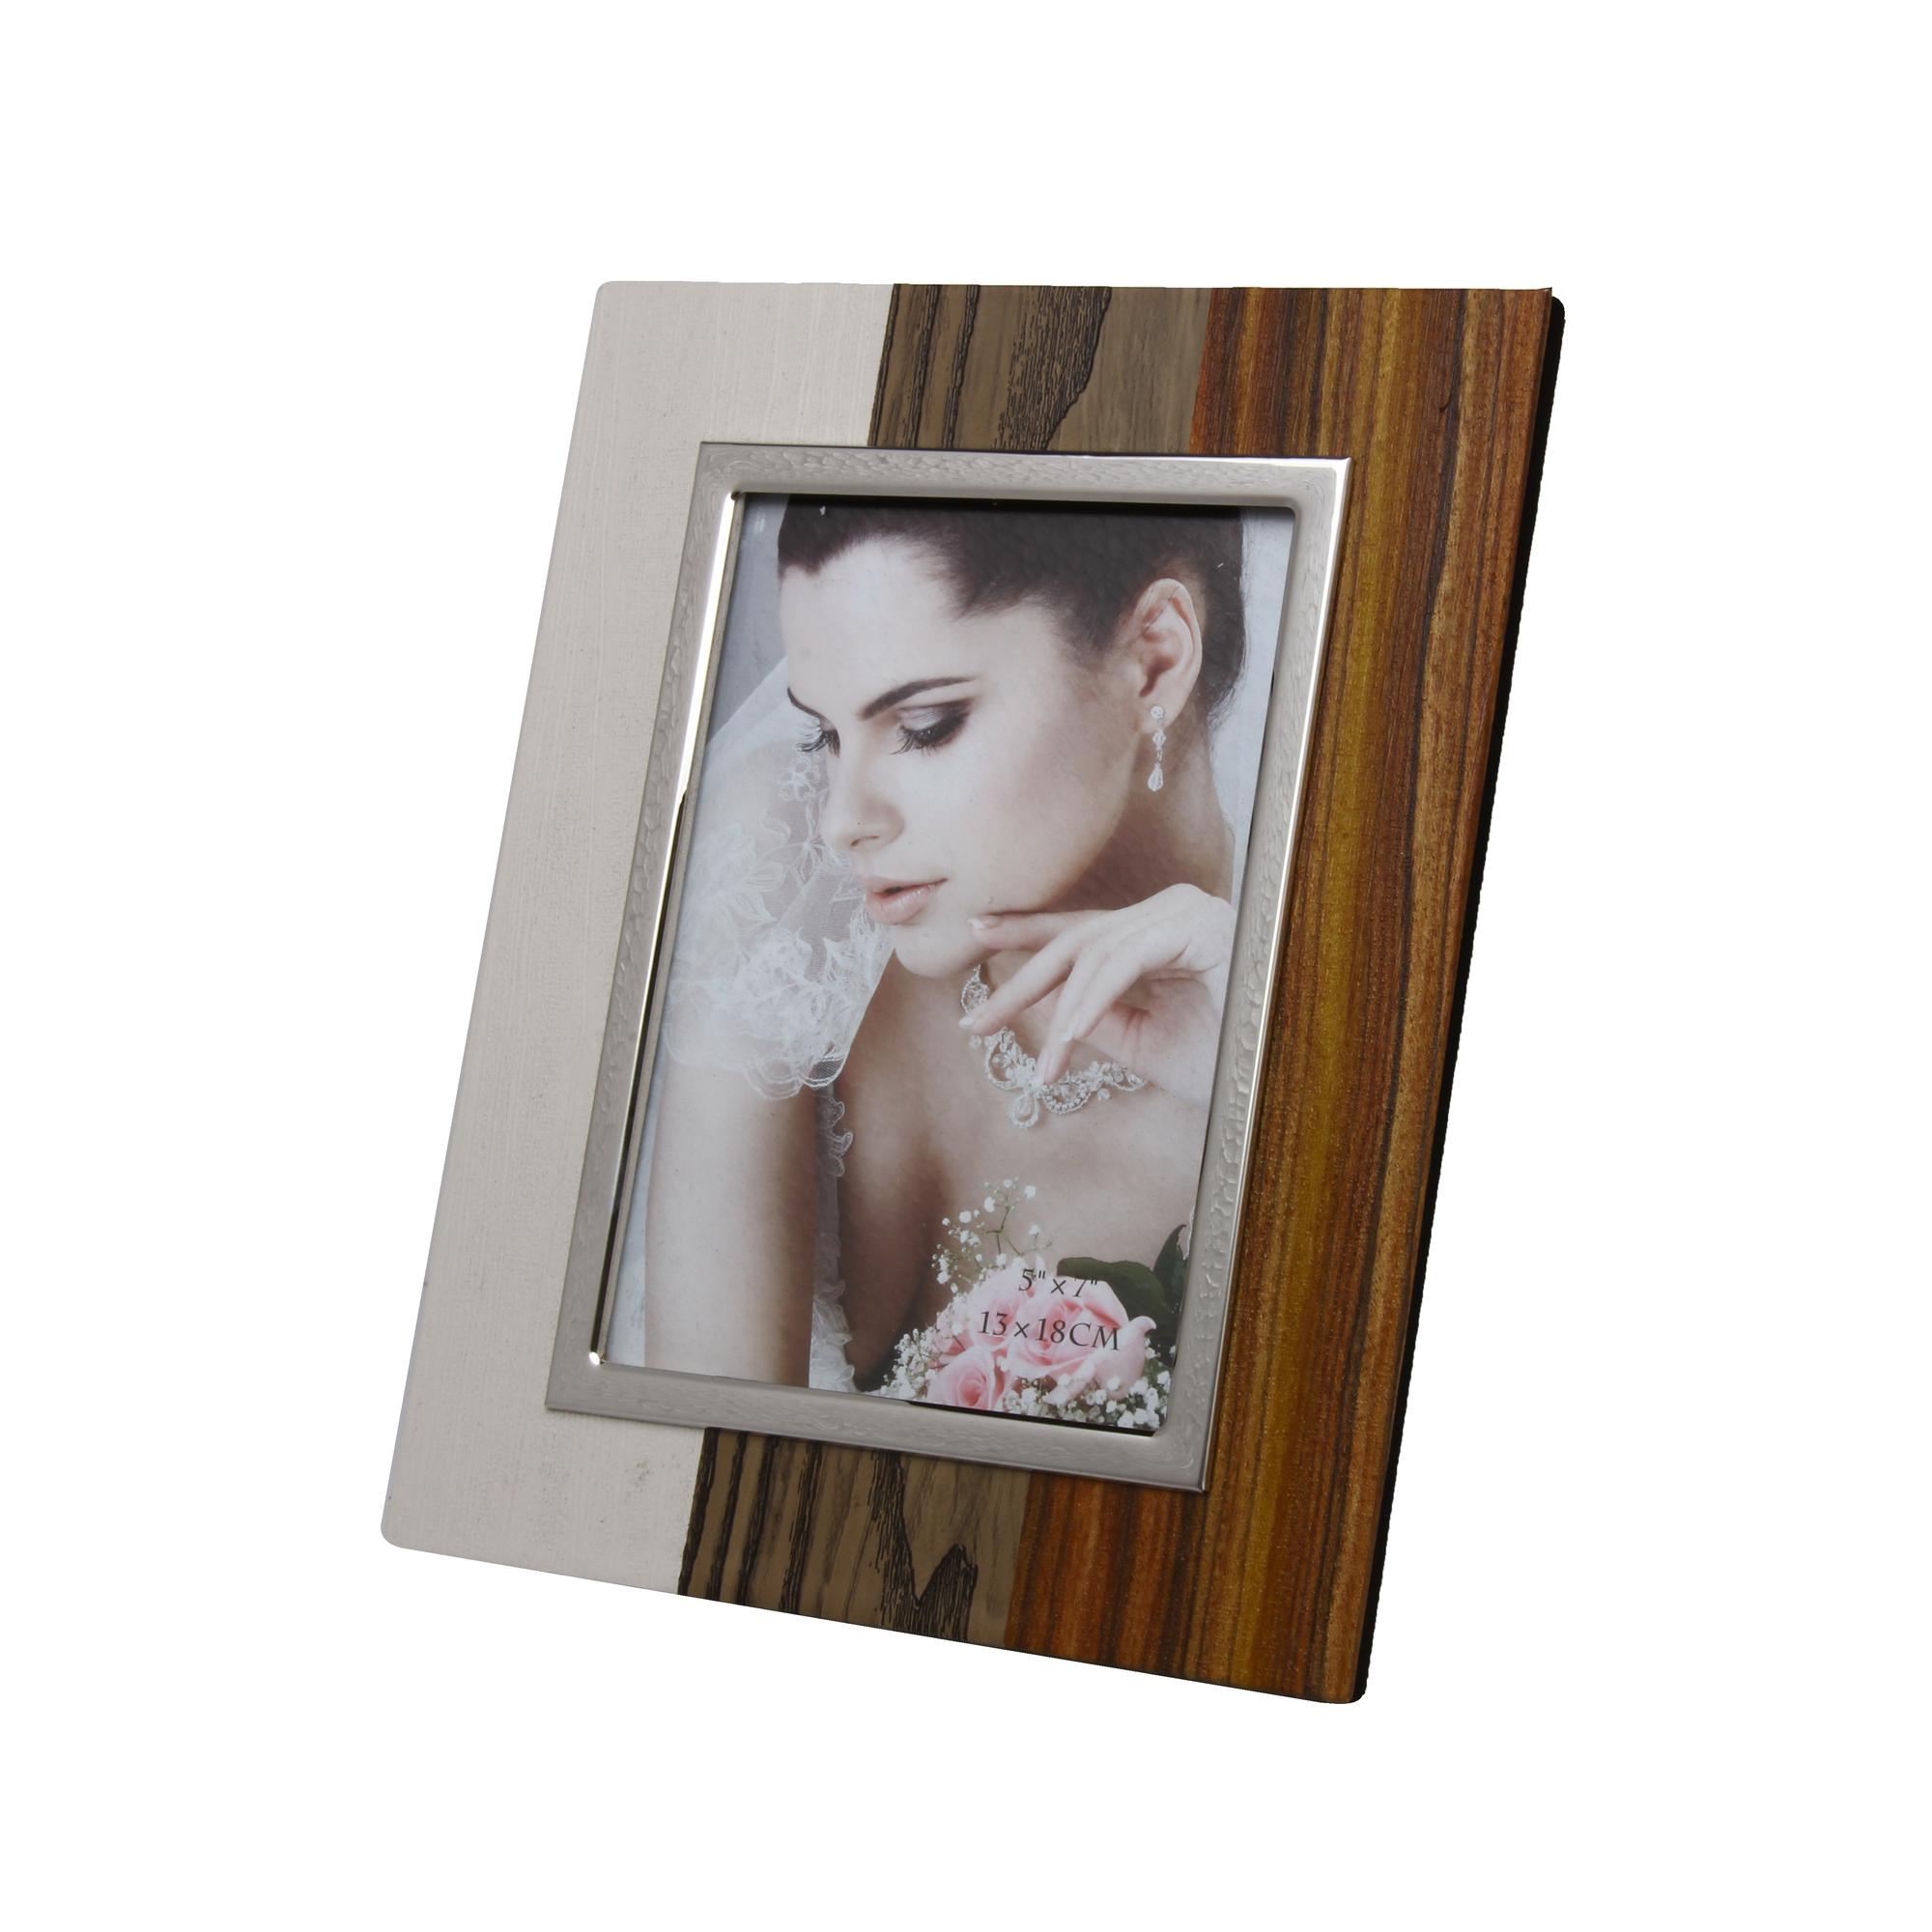 PICTURE FRAME 5 X 7 - 530-592969